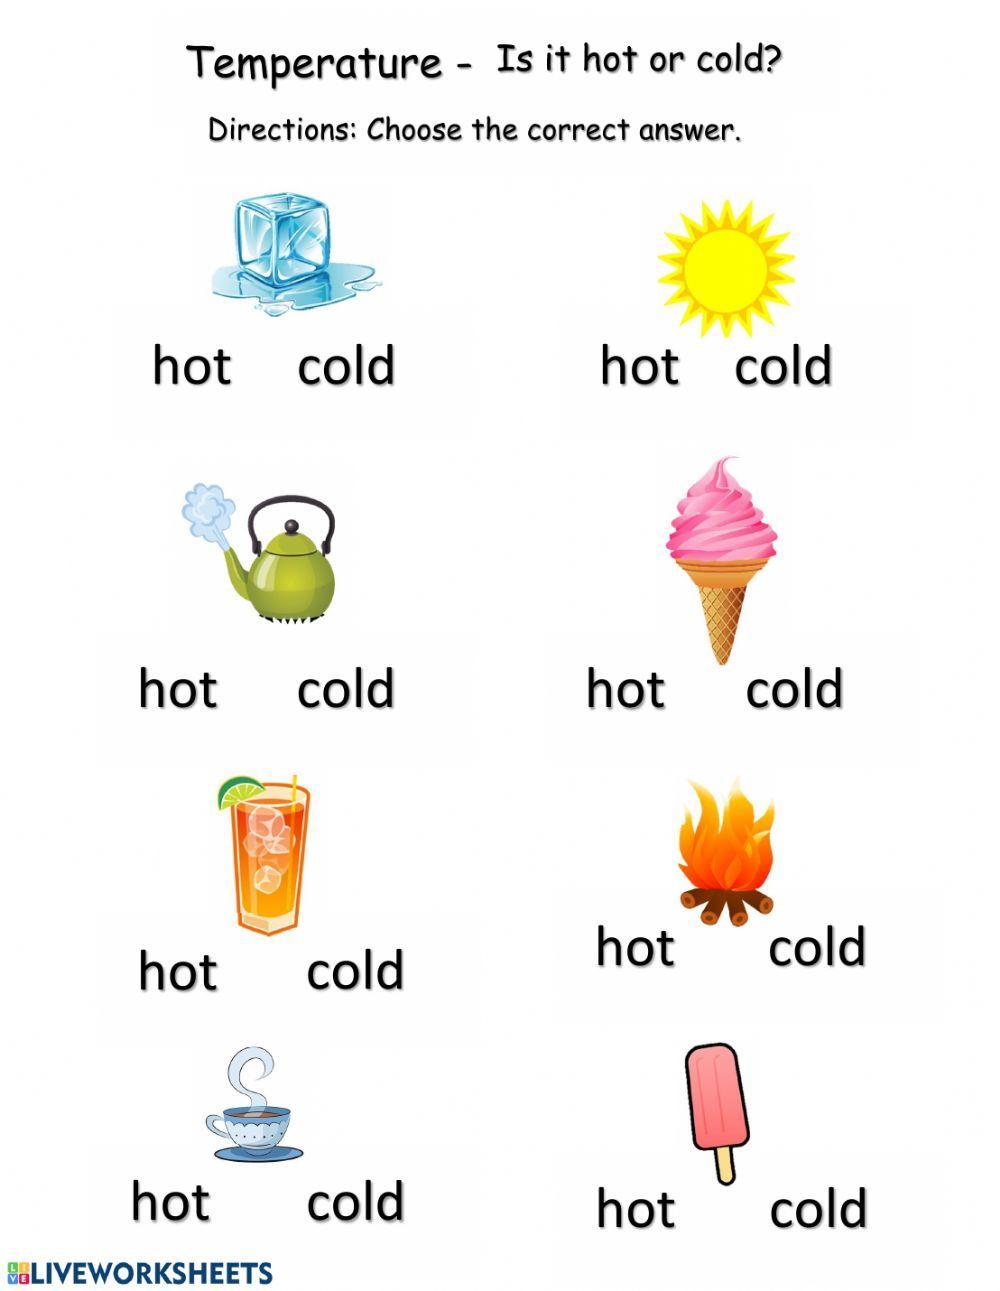 Hot or cold